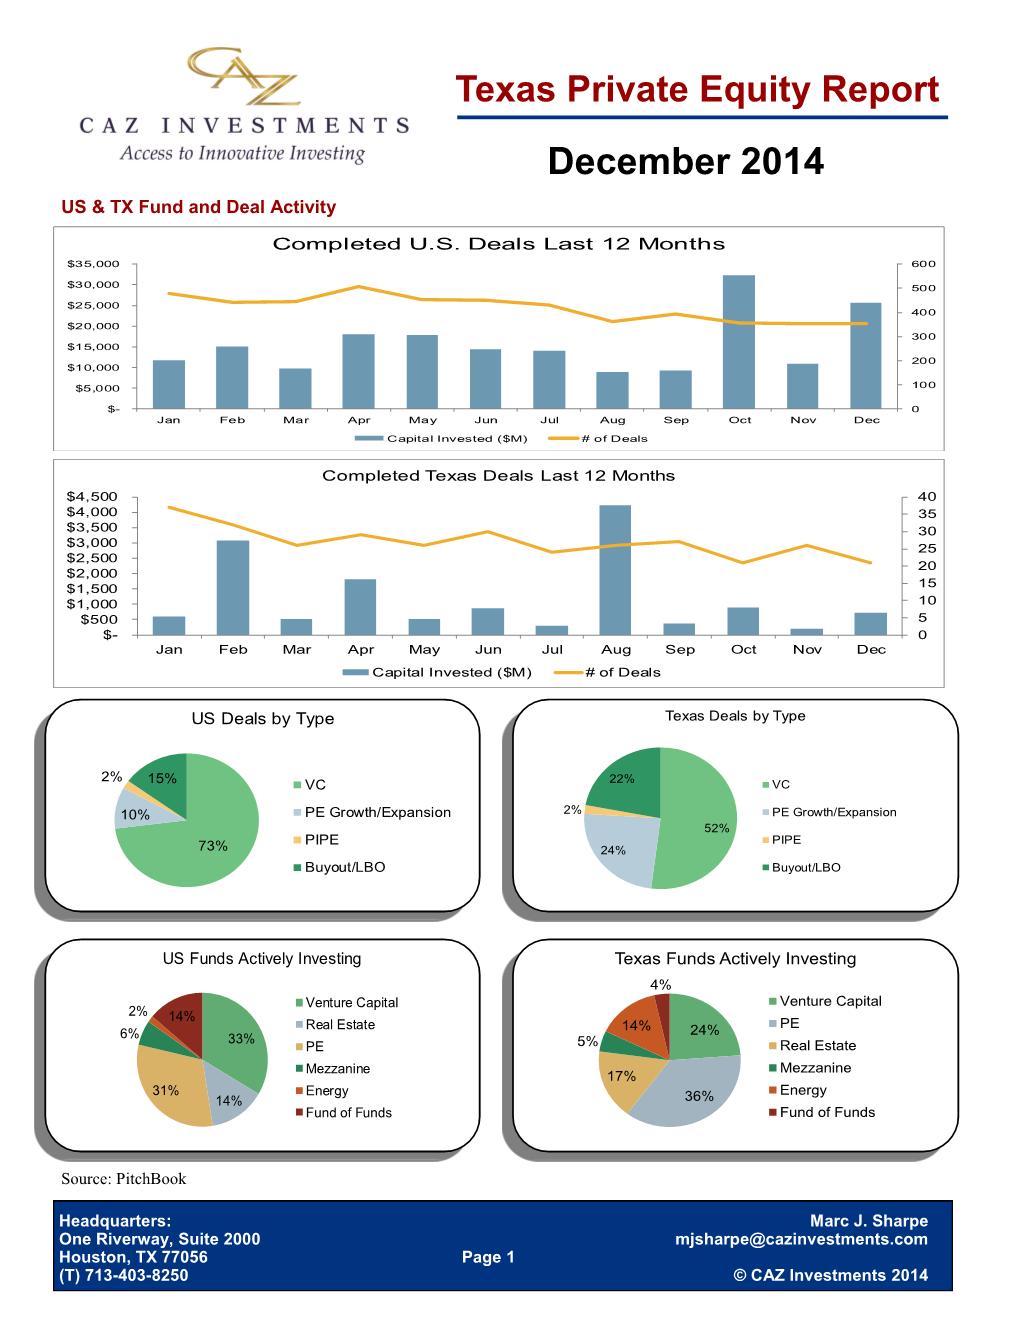 Texas Private Equity Report December 2014 US & TX Fund and Deal Activity